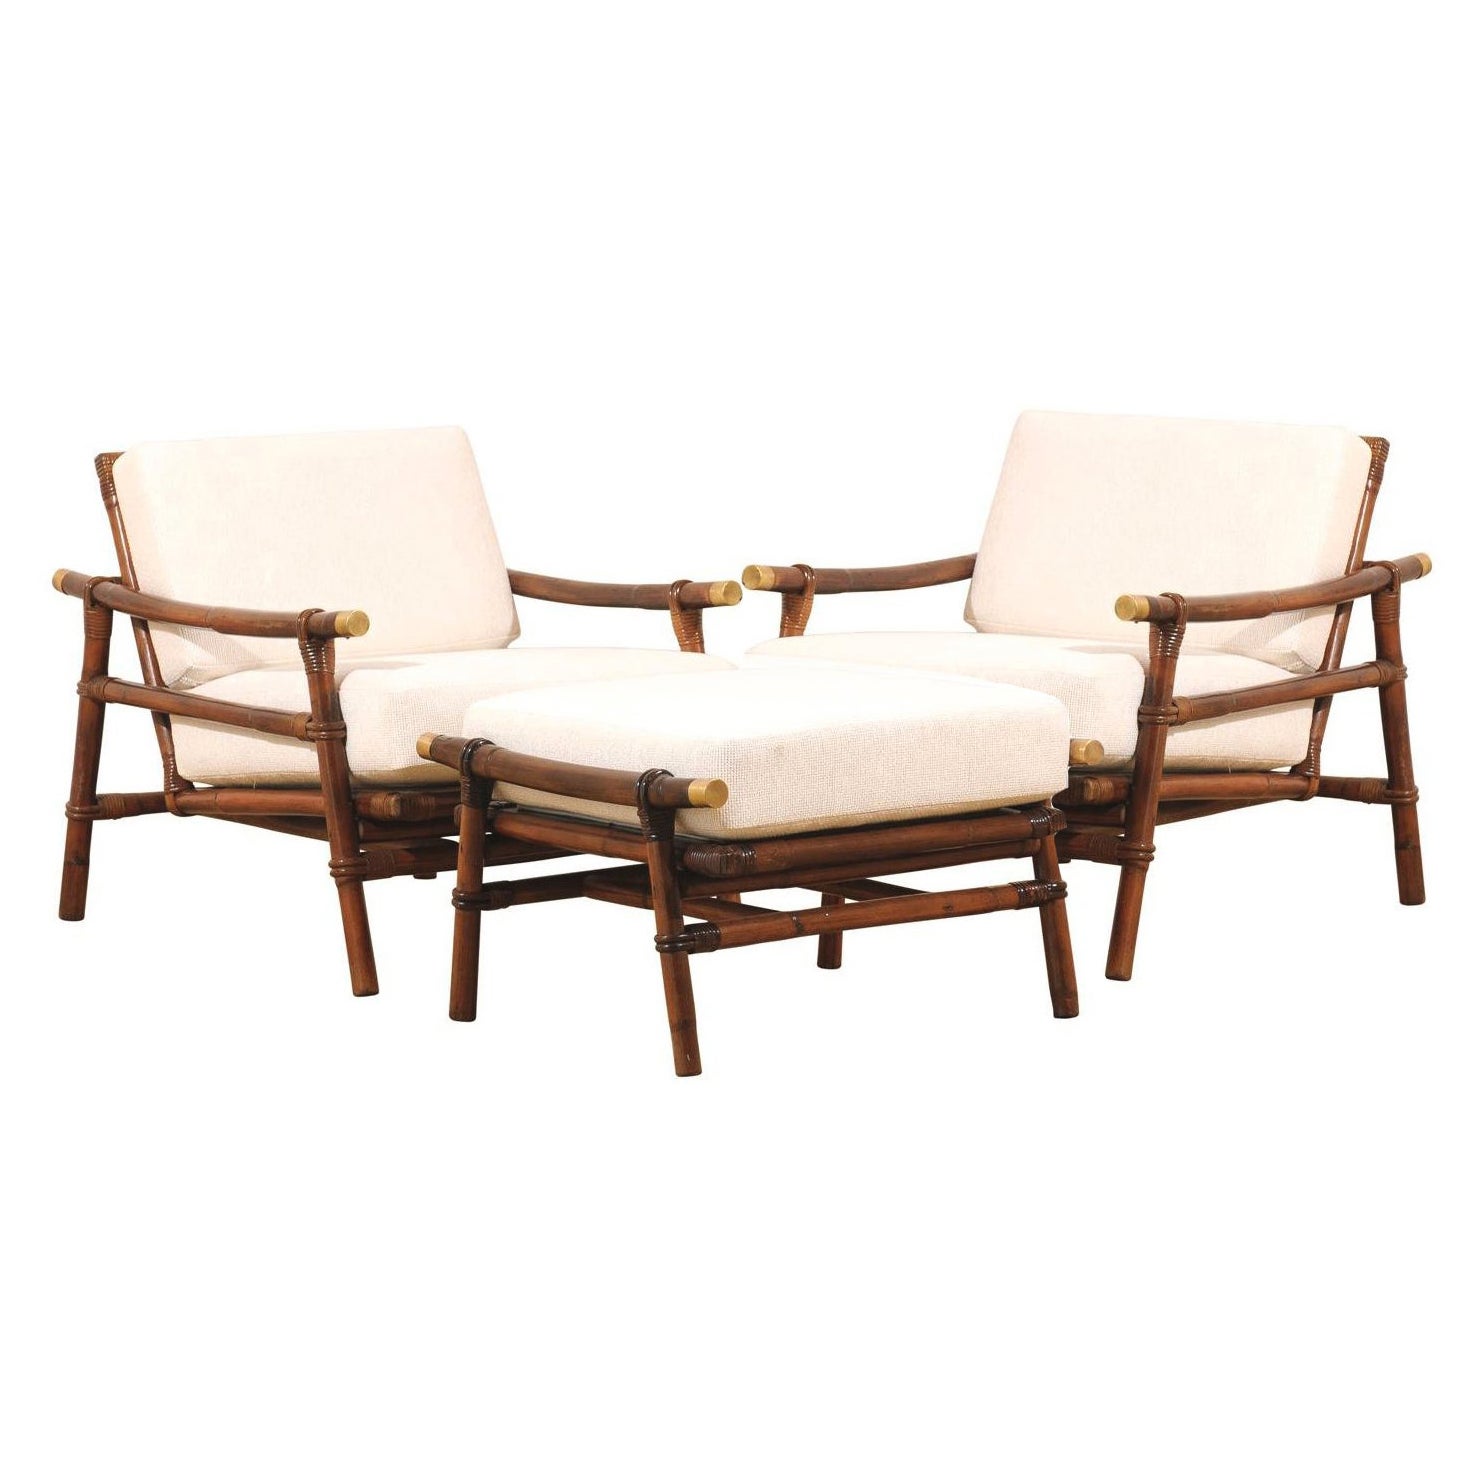 Four Superb Restored Loungers by John Wisner for Ficks Reed, circa 1954